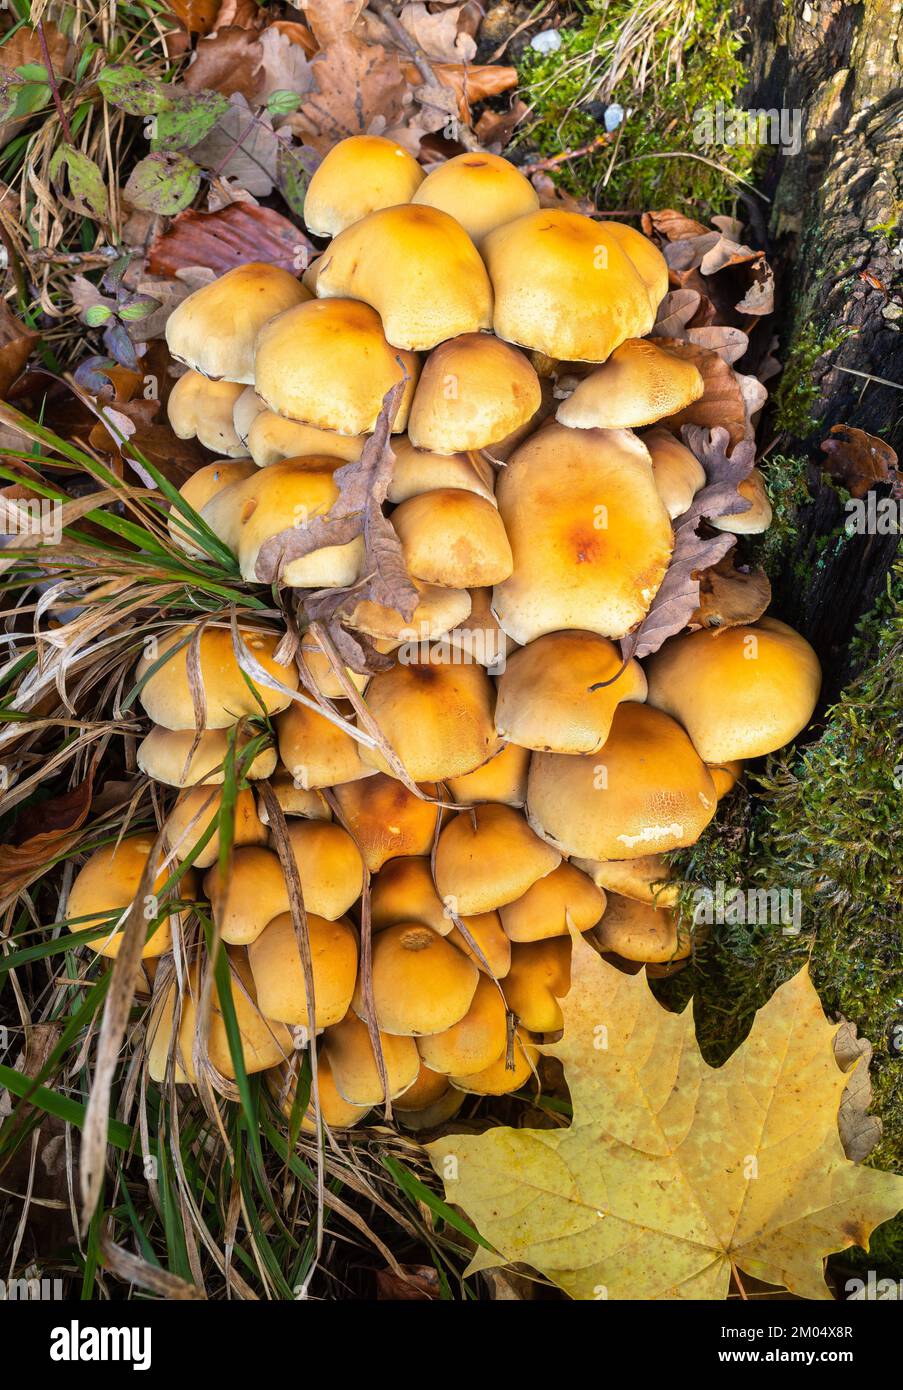 A group of poisonous mushrooms on a tree stump in autumn Stock Photo